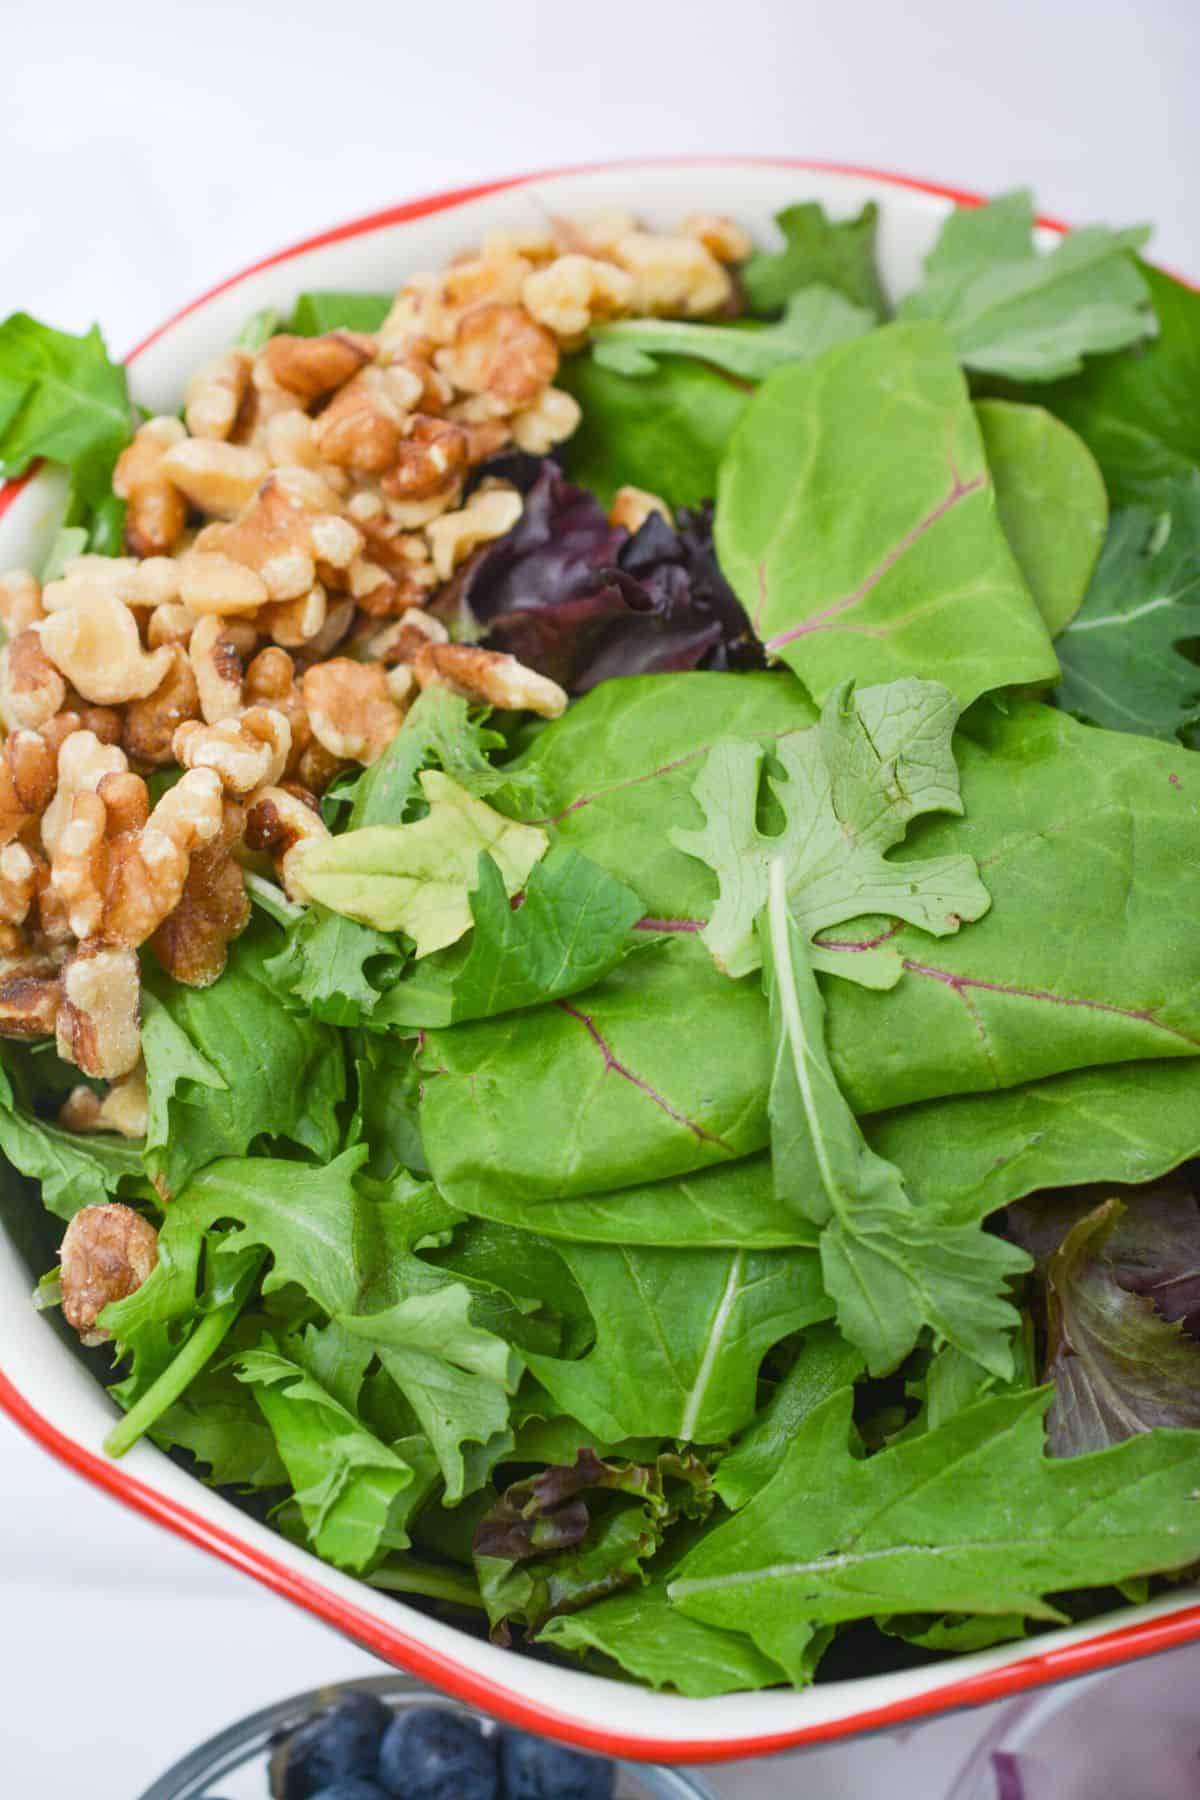 A bowl of greens with walnuts and blueberries.